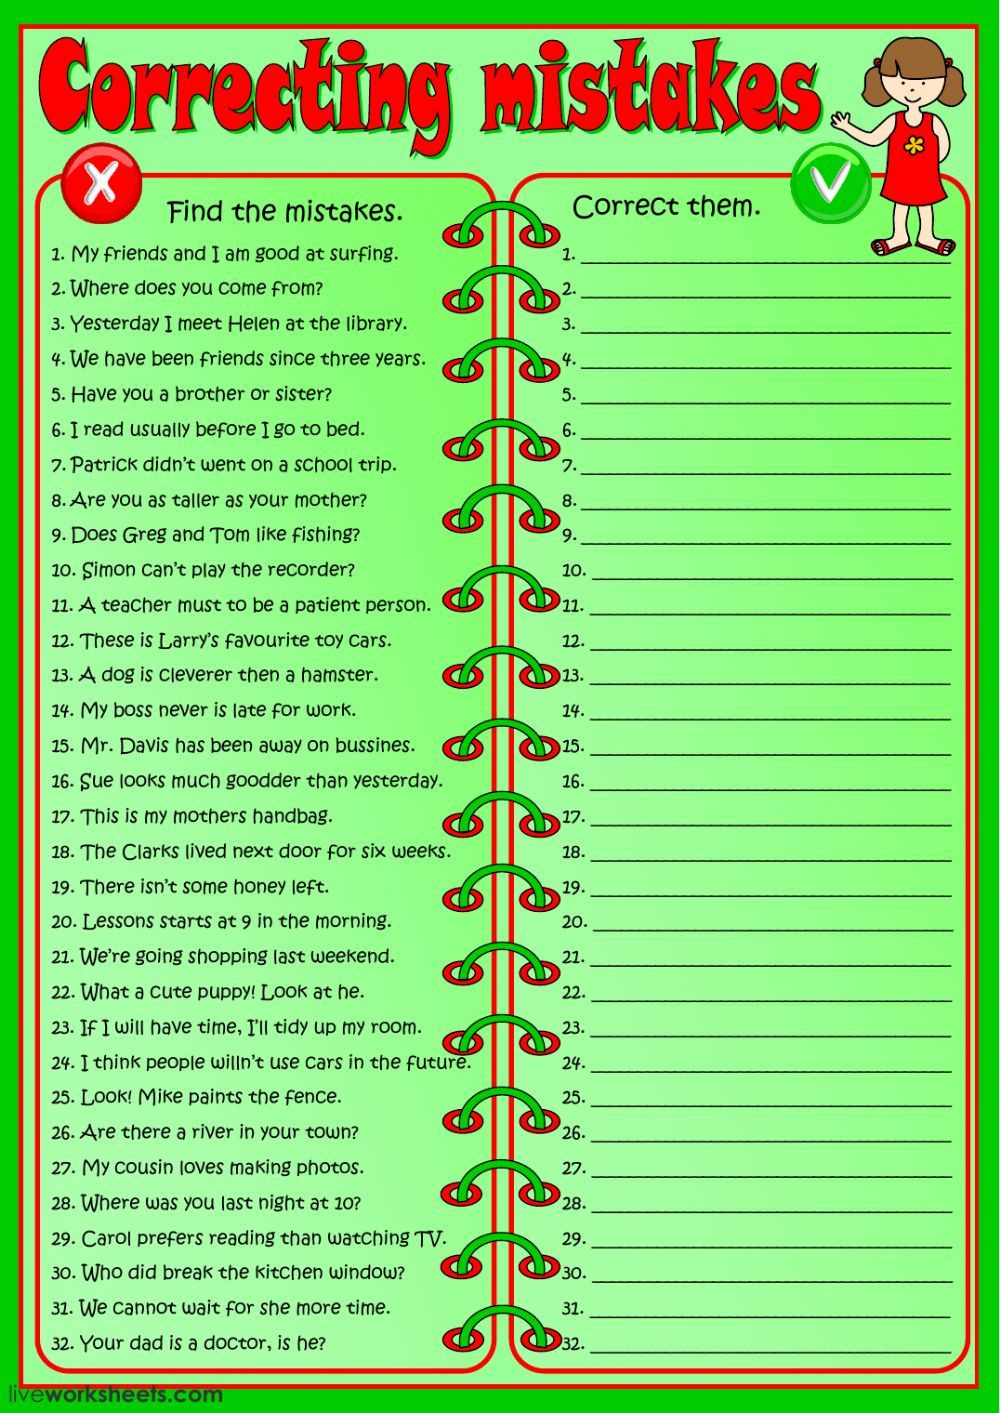 Grammar Interactive And Downloadable Worksheet You Can Do The 